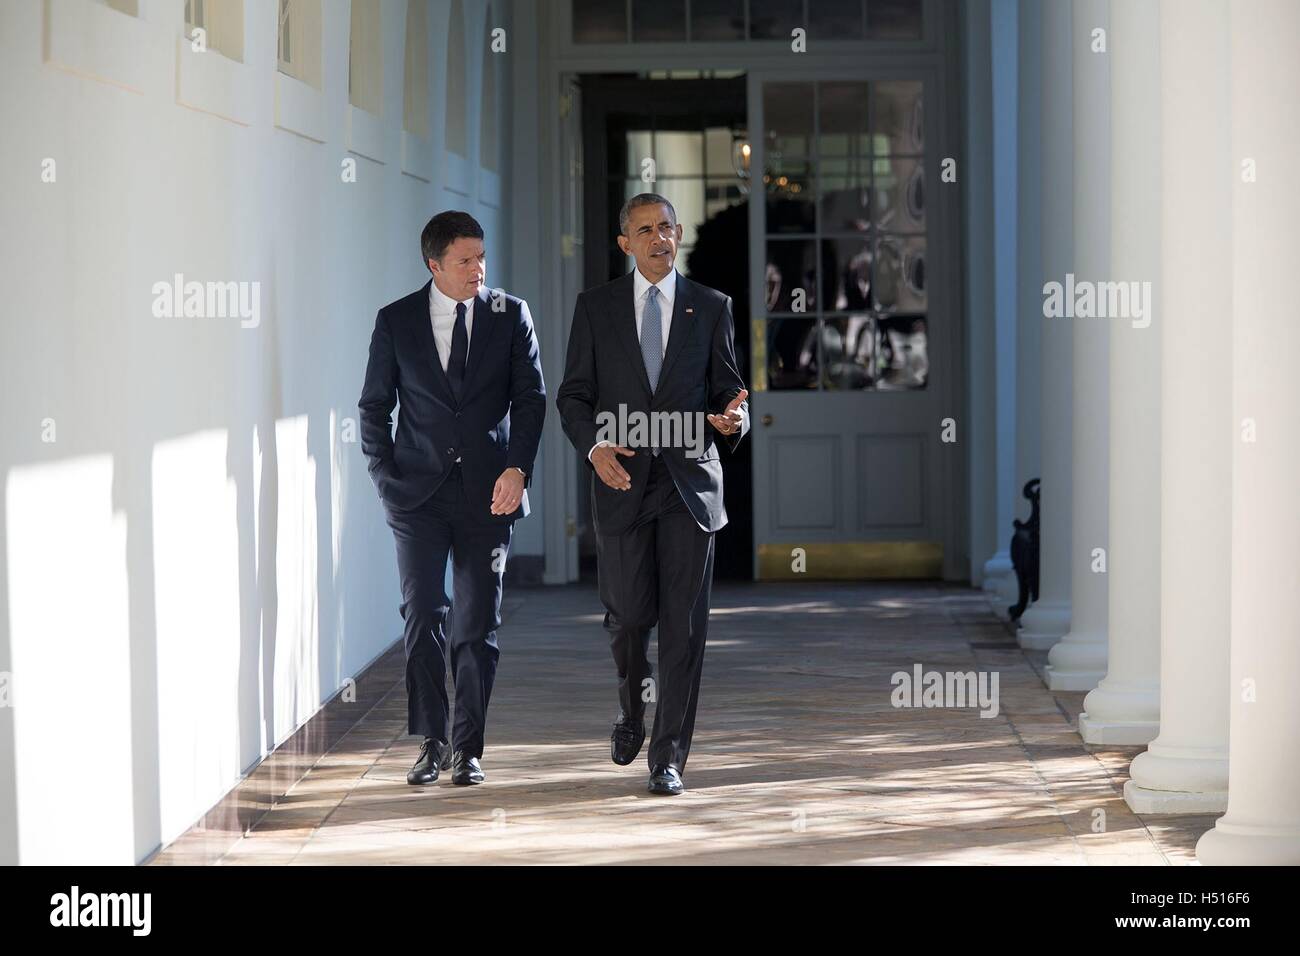 Washington DC, USA. 18th Oct, 2016. U.S. President Barack Obama and Italian Prime Minister Matteo Renzi walk along the Colonnade to the Oval Office at the White House October 18, 2016 in Washington, DC. Credit:  Planetpix/Alamy Live News Stock Photo